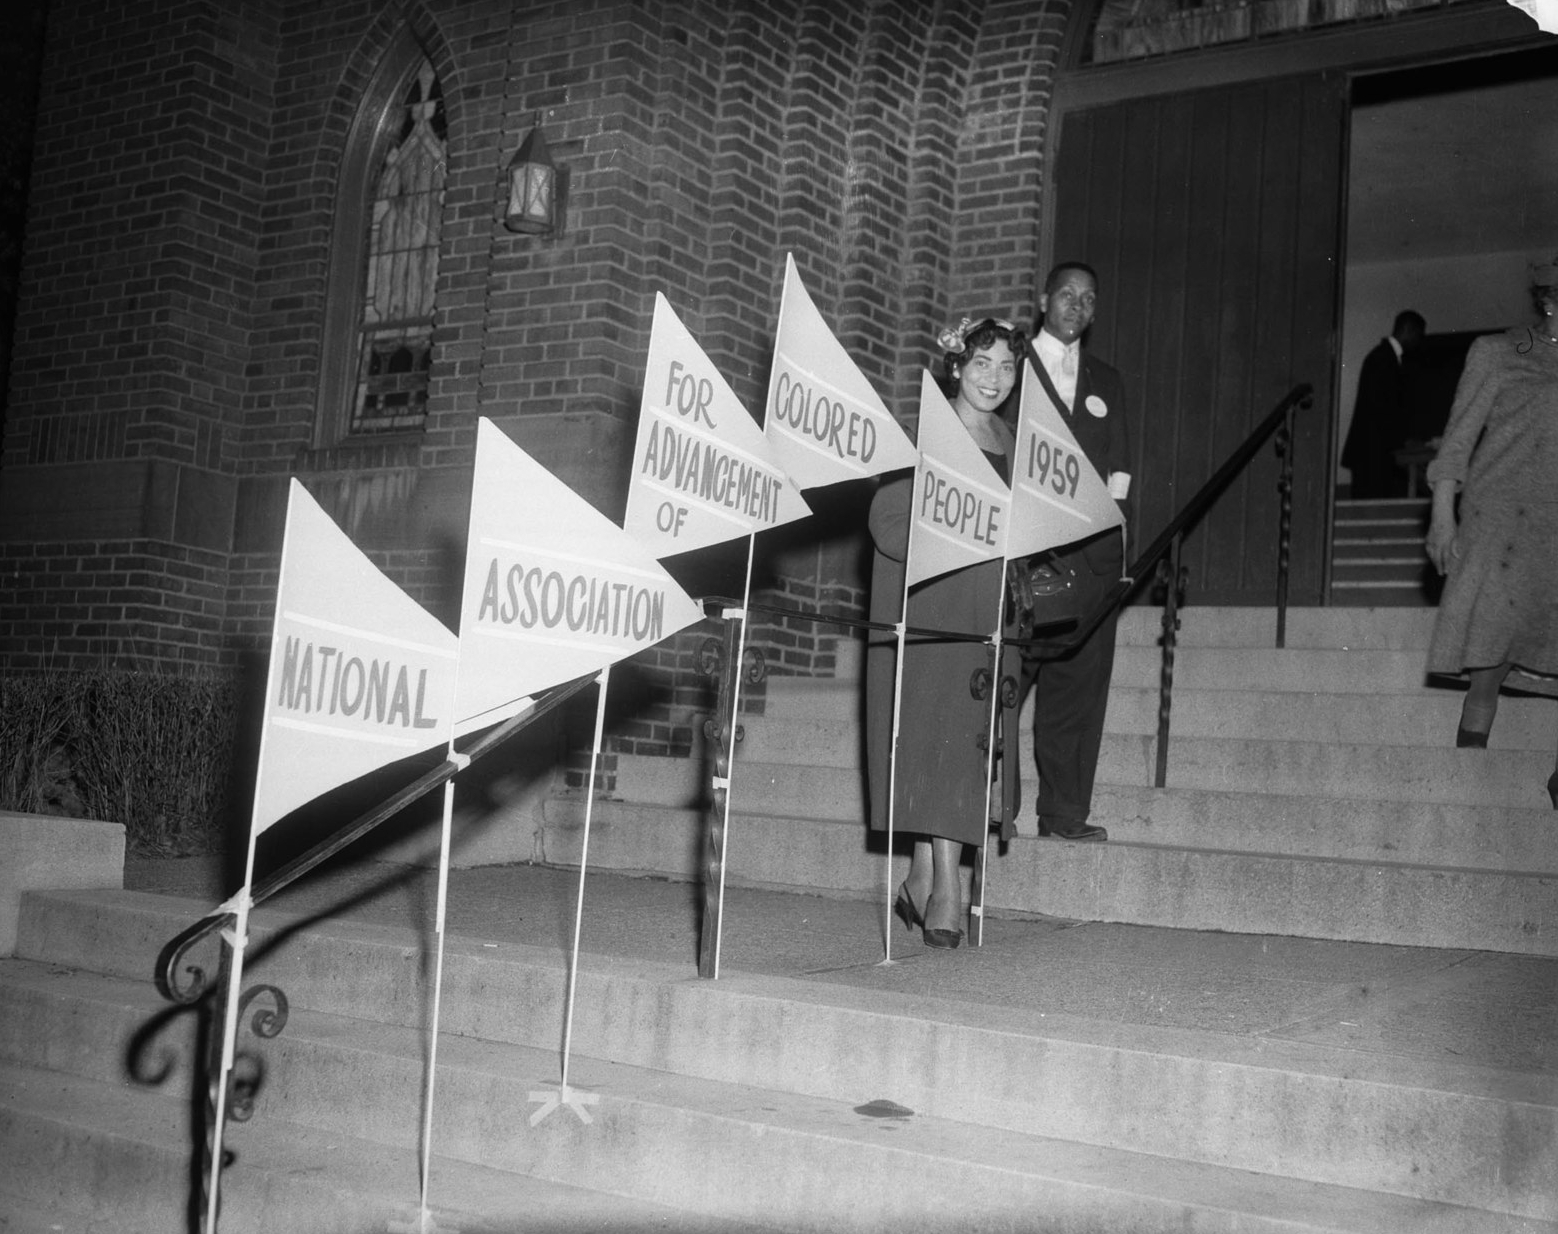 People standing on stairs leading into a church, with banner signs that read "National Organization for the Advancement of Colored People"